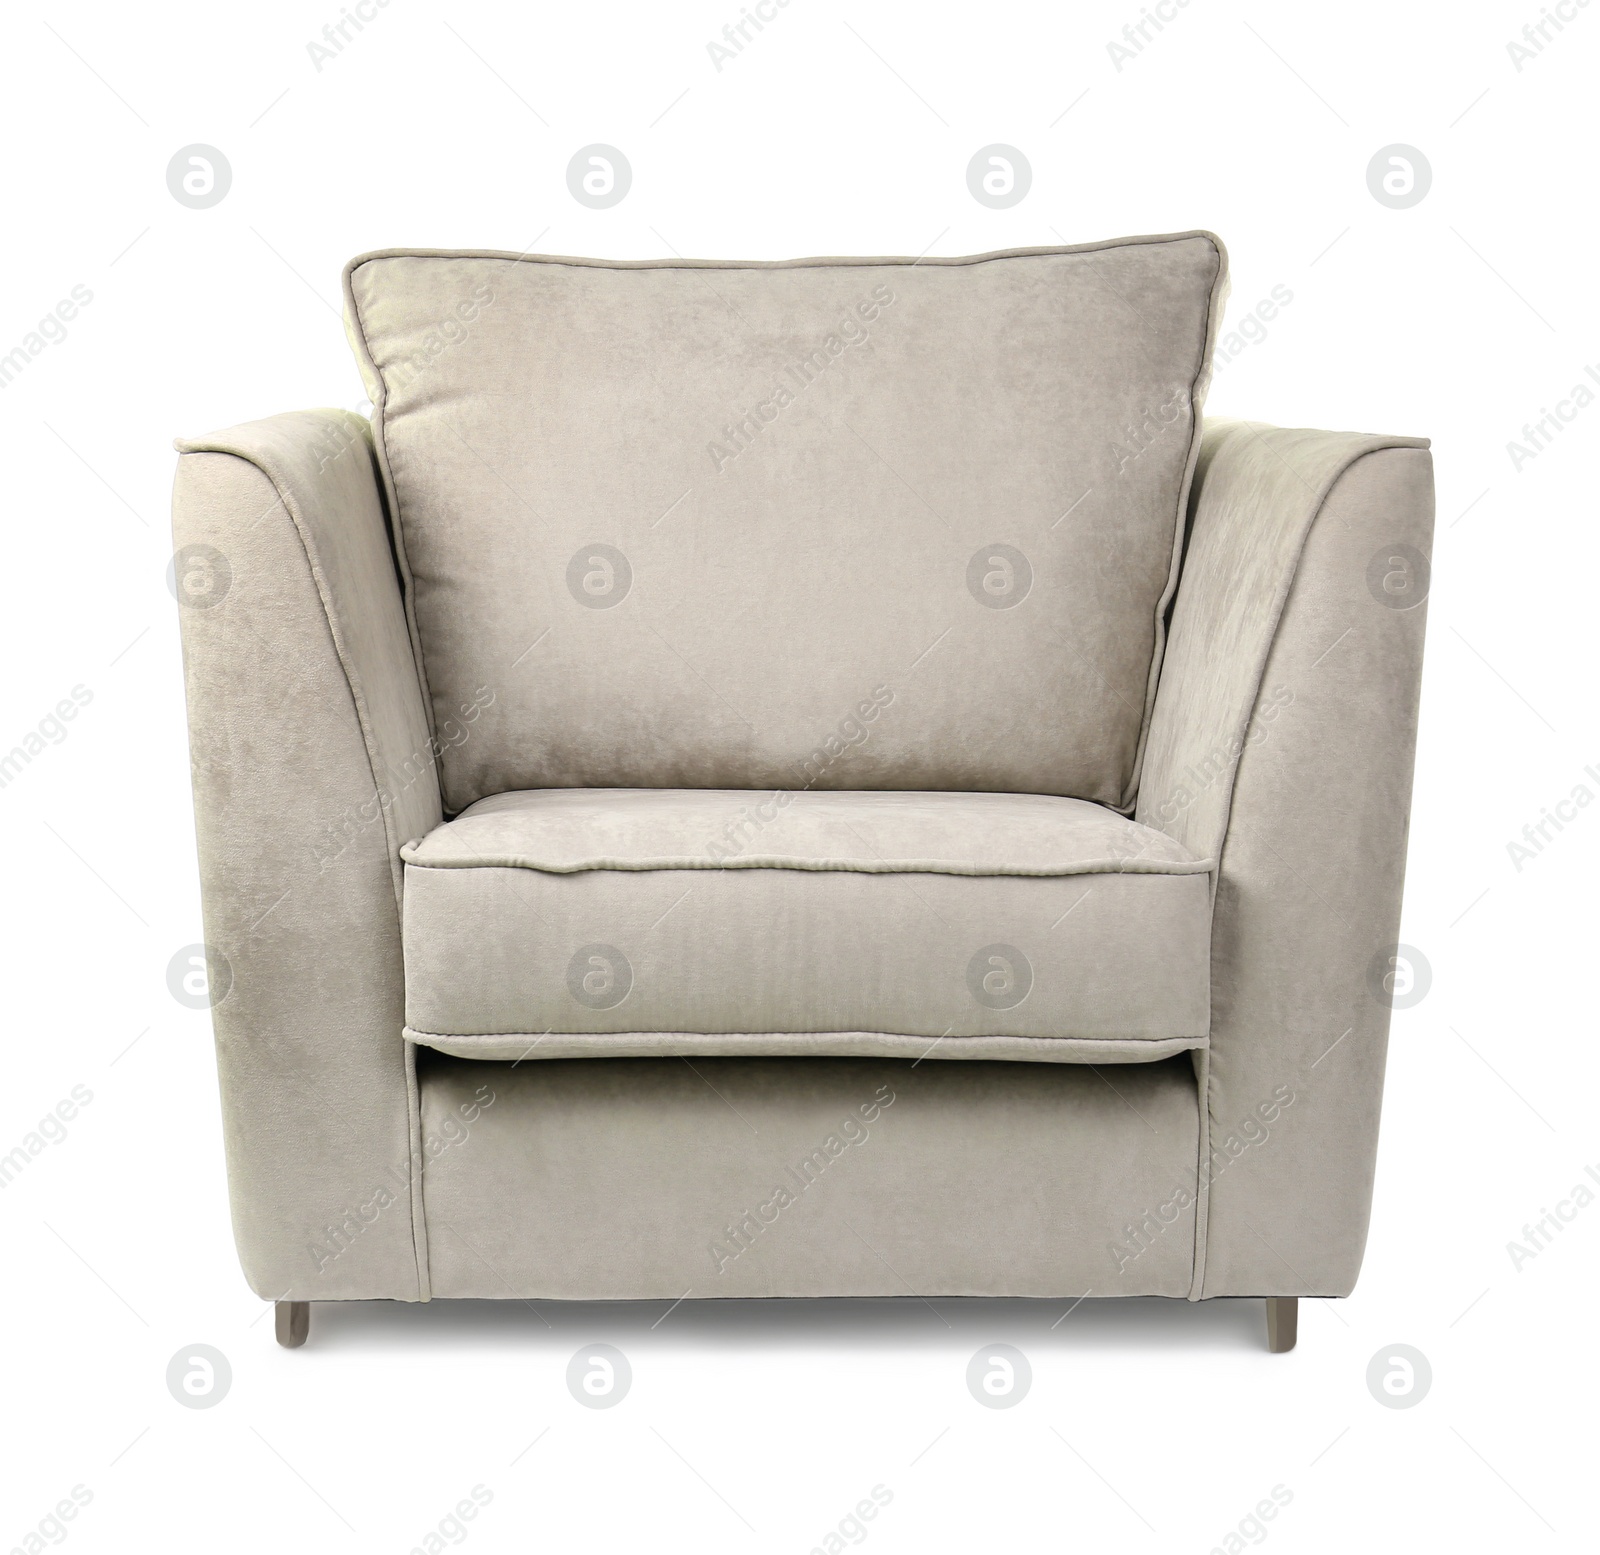 Image of One comfortable bone color armchair isolated on white